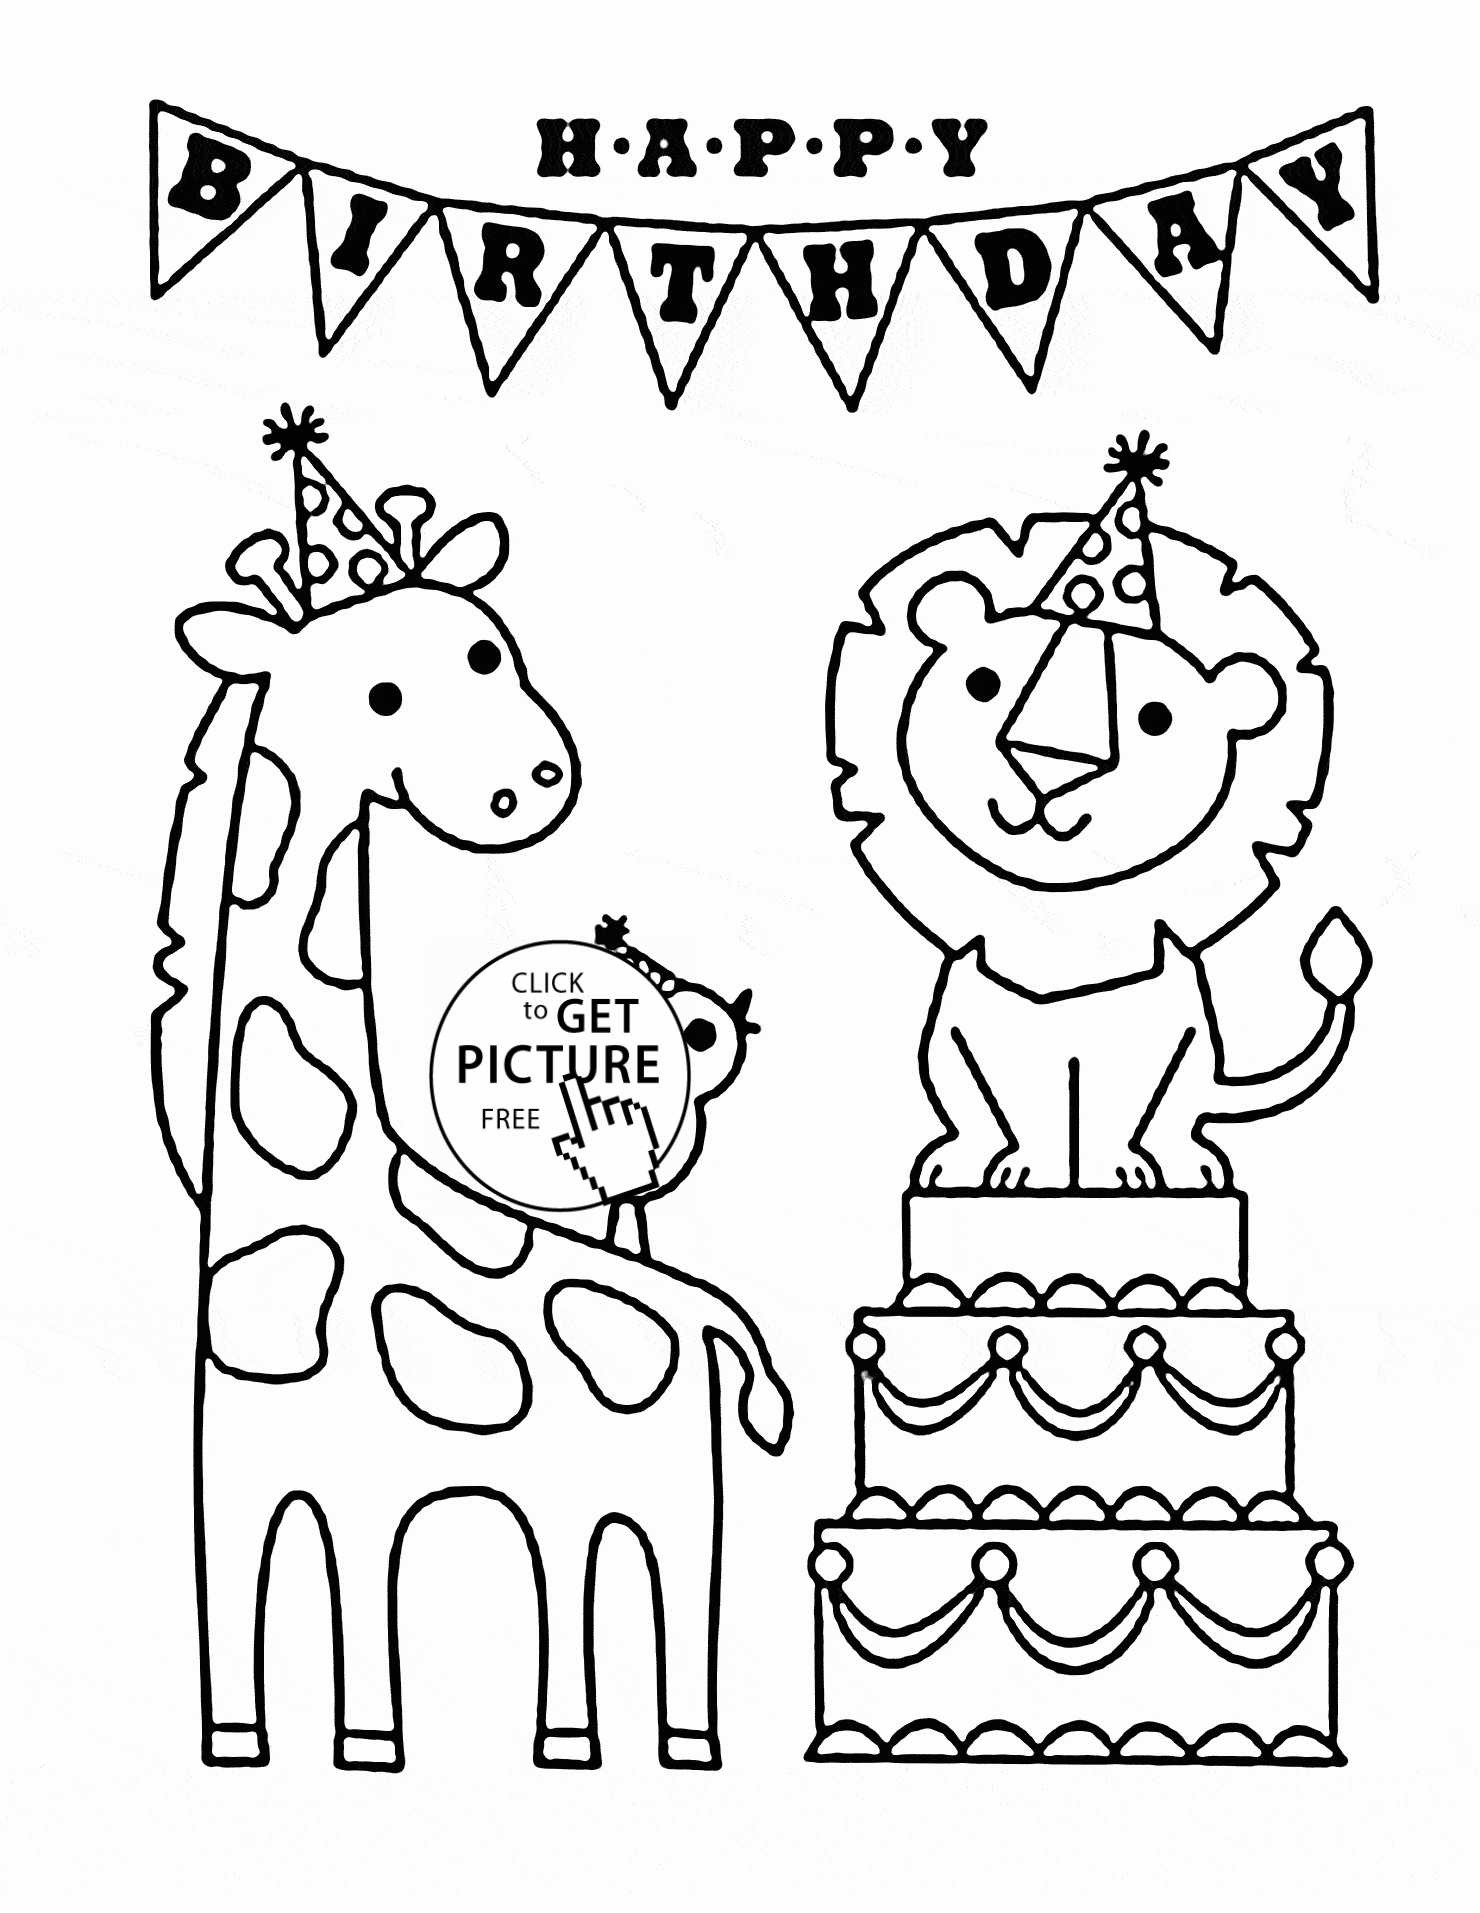 Happy Birthday And Funny Animals Coloring Page For - Cute Birthday Coloring Pages , HD Wallpaper & Backgrounds